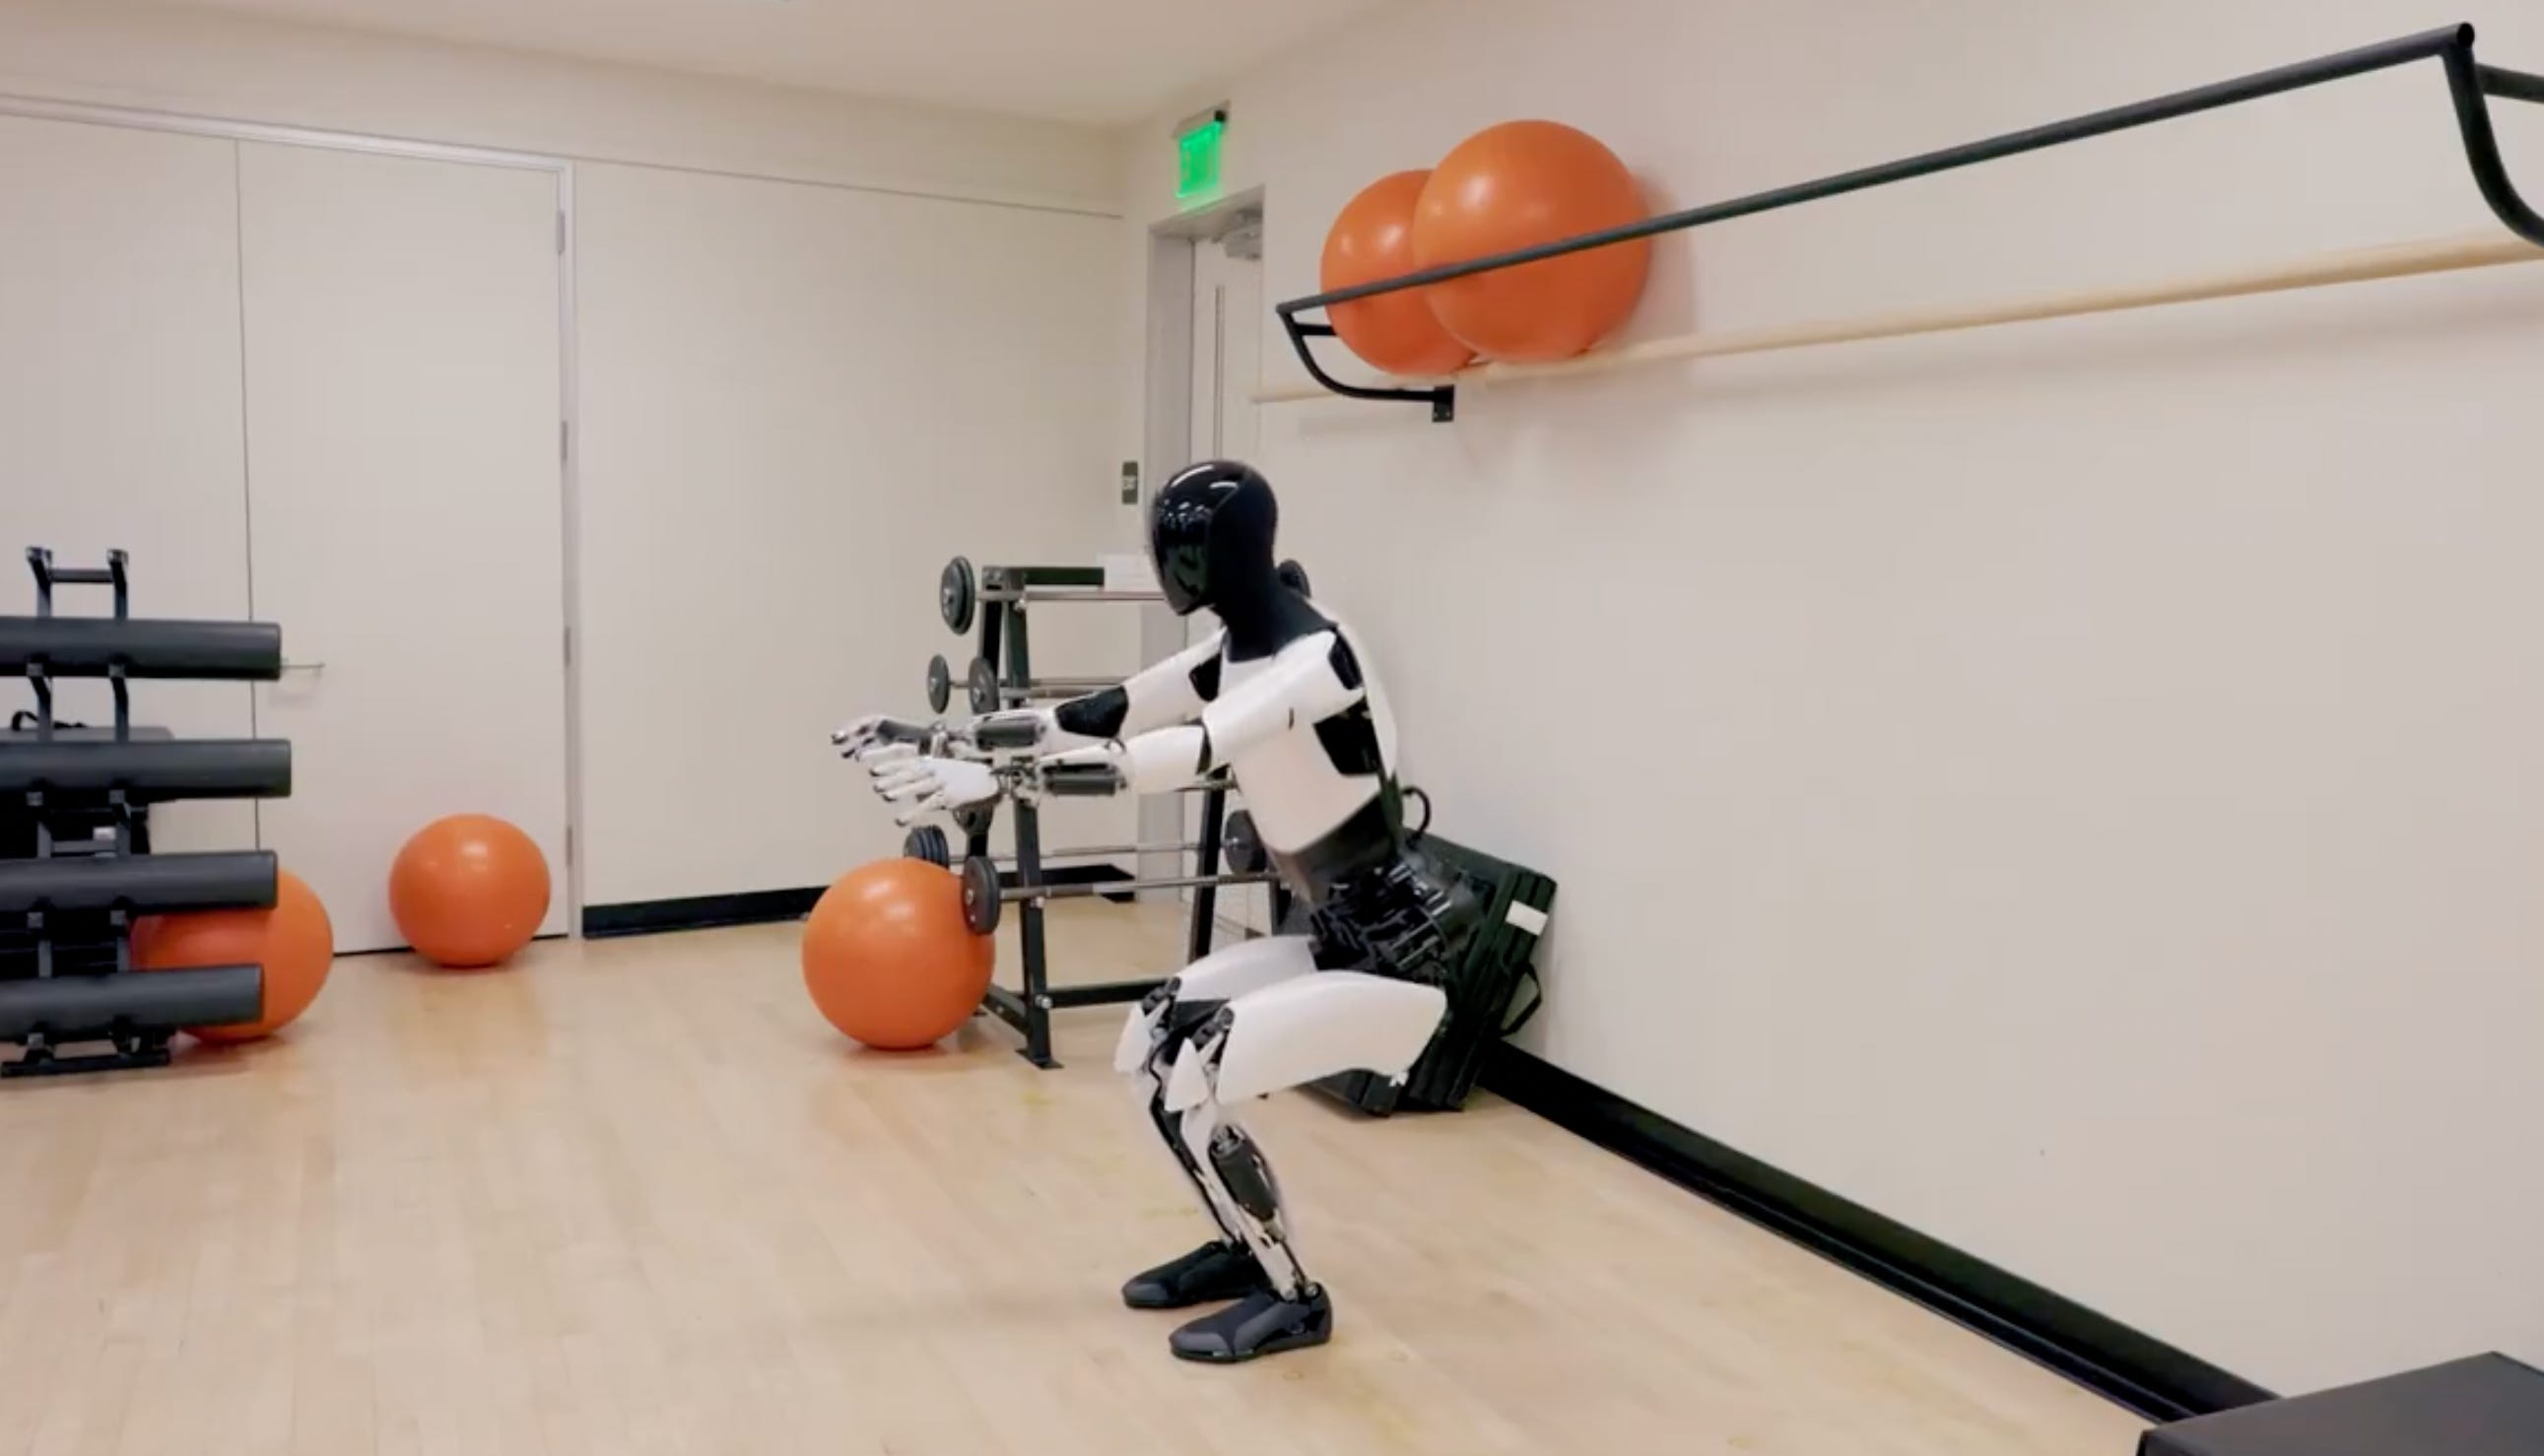 thank goodness, tesla's humanoid robot optimus can now squat and pick up an egg